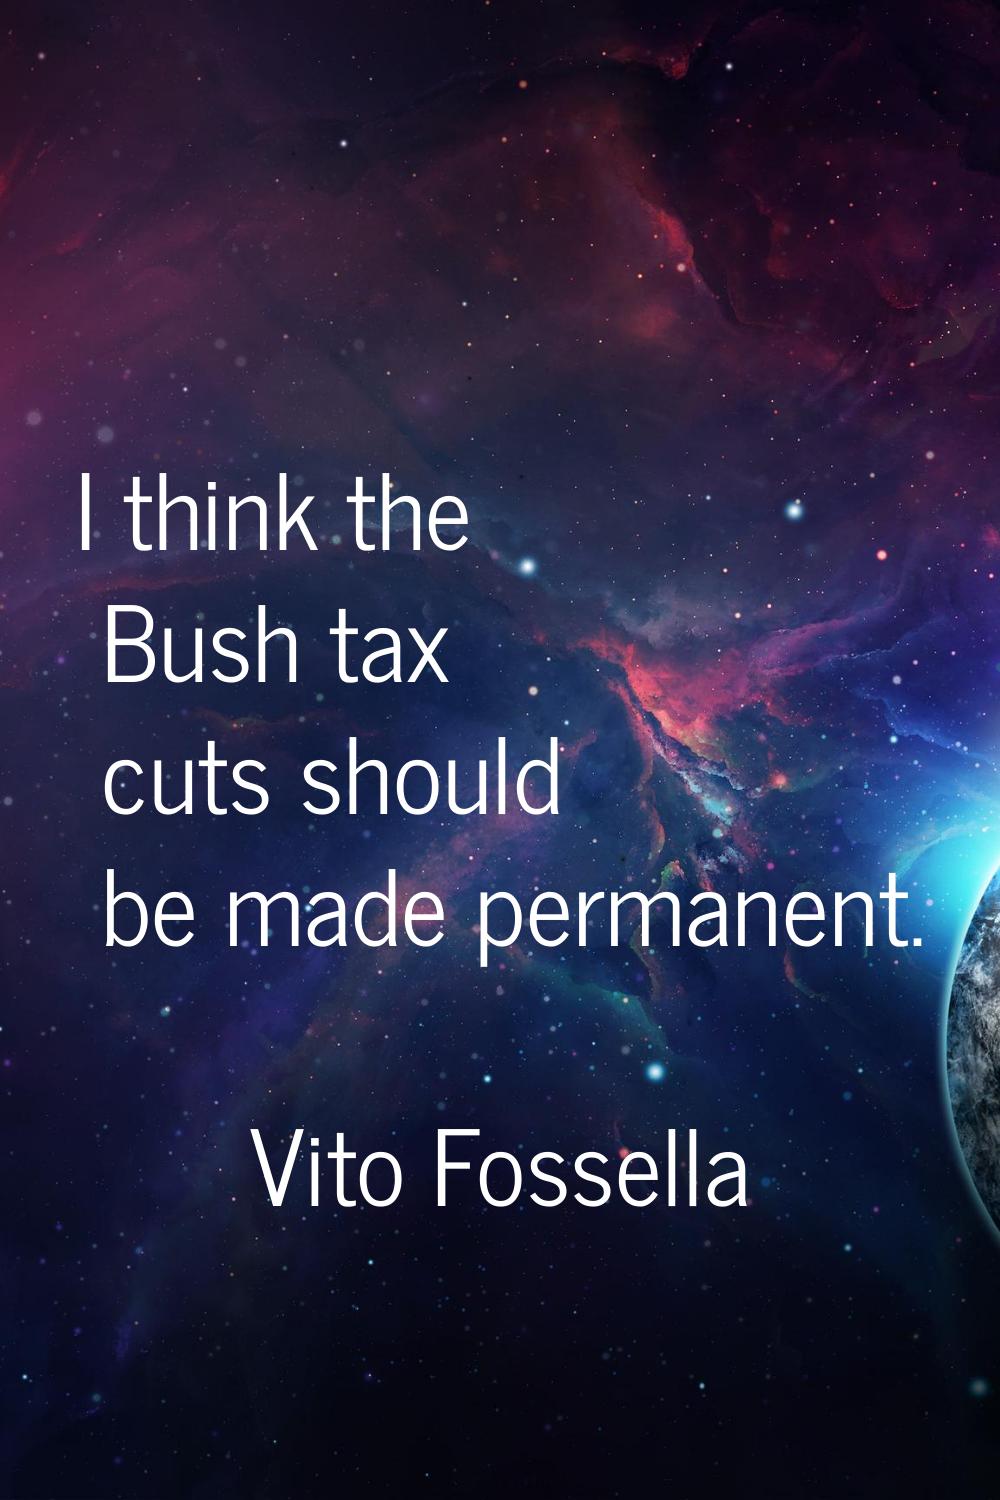 I think the Bush tax cuts should be made permanent.